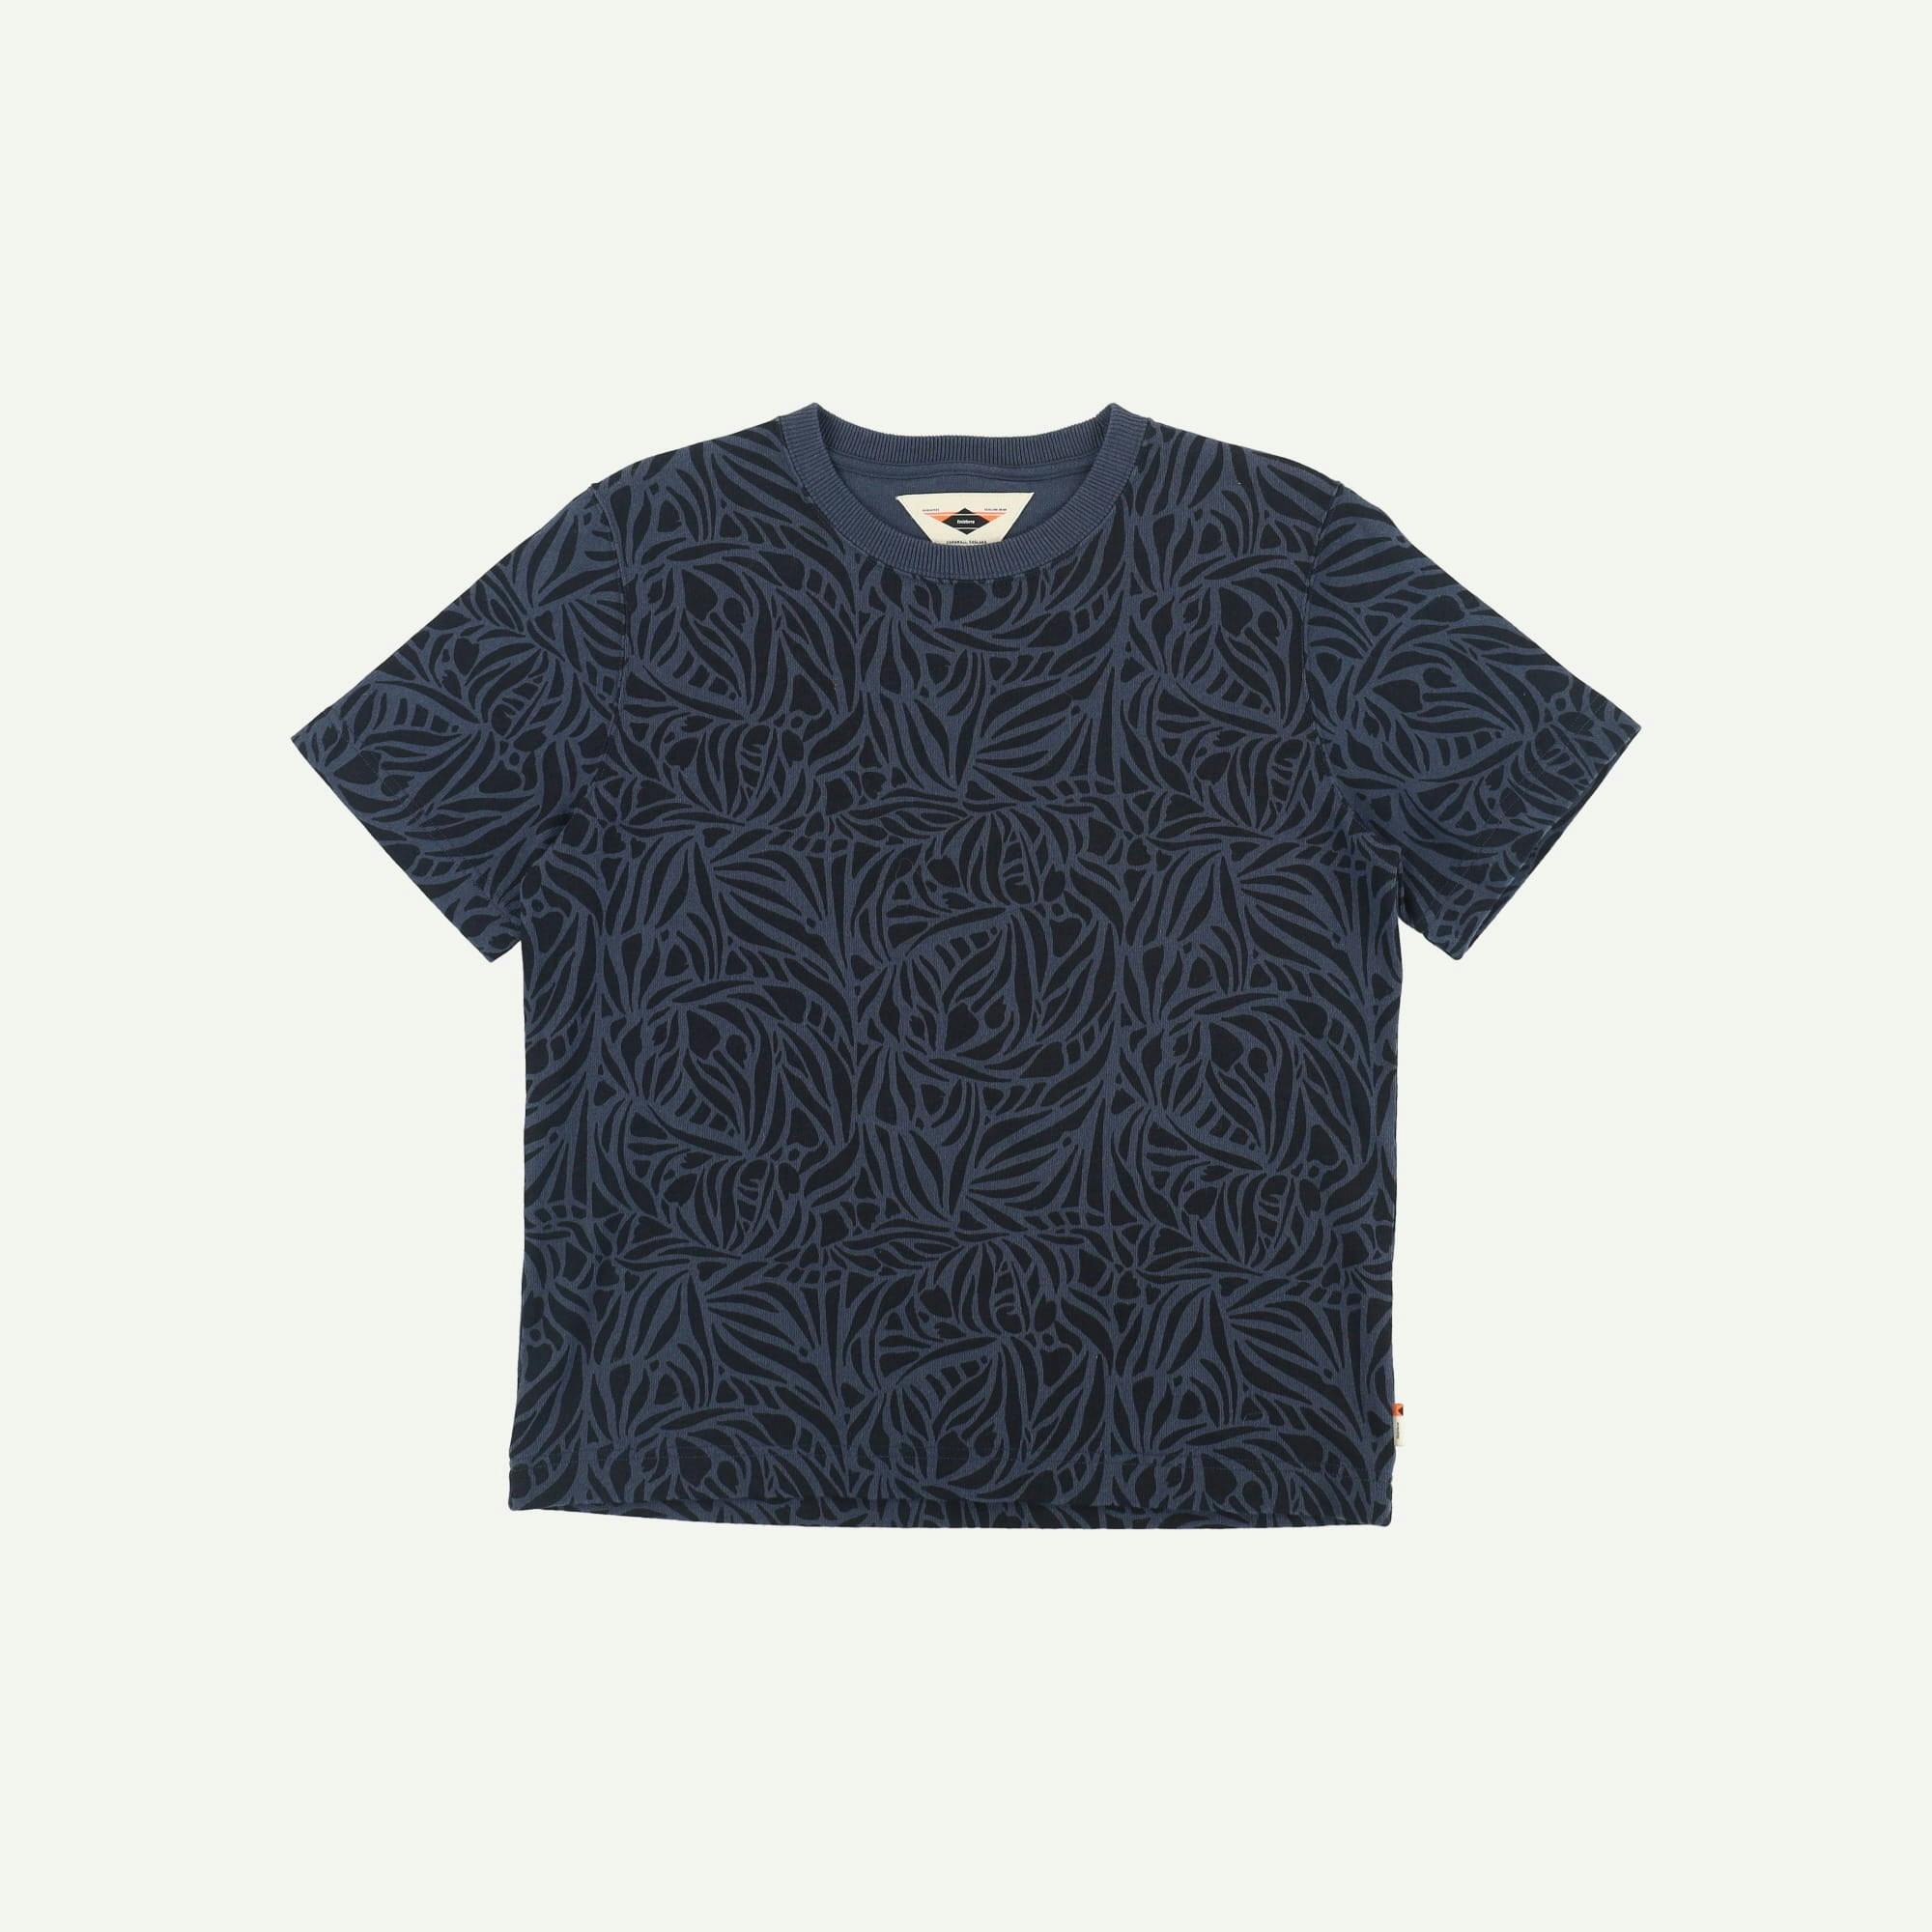 Finisterre Brand new Navy T-shirt